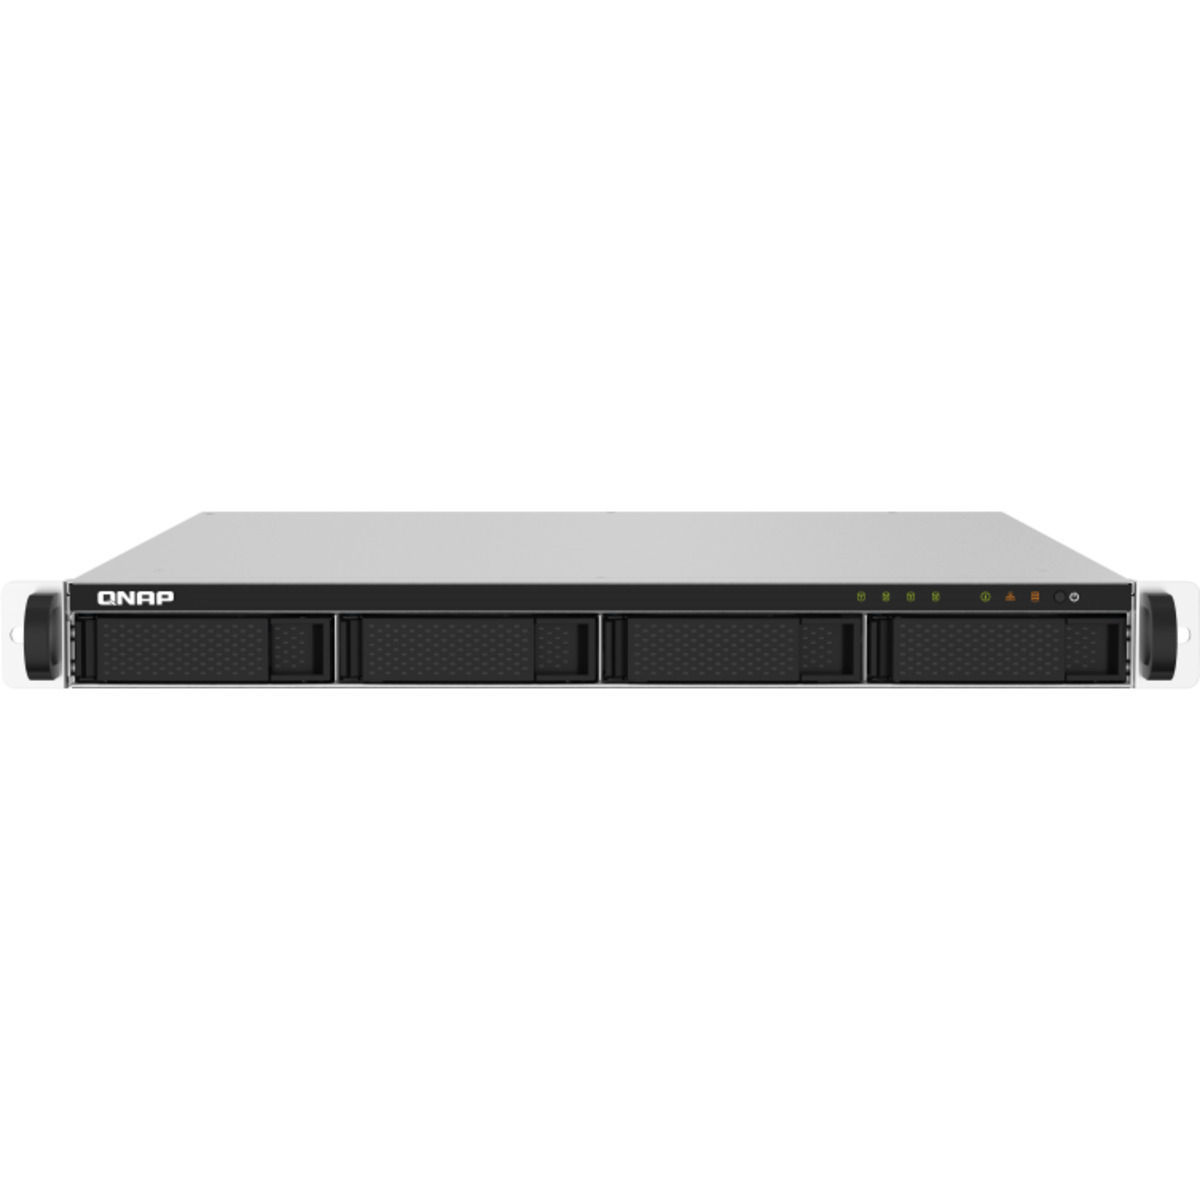 buy $1617 QNAP TS-432PXU-RP 16tb RackMount NAS - Network Attached Storage Device 4x4000gb Western Digital Blue WD40EZRZ 3.5 5400rpm SATA 6Gb/s HDD CONSUMER Class Drives Installed - Burn-In Tested - FREE RAM UPGRADE - nas headquarters buy network attached storage server device das new raid-5 free shipping usa christmas new year holiday sale TS-432PXU-RP